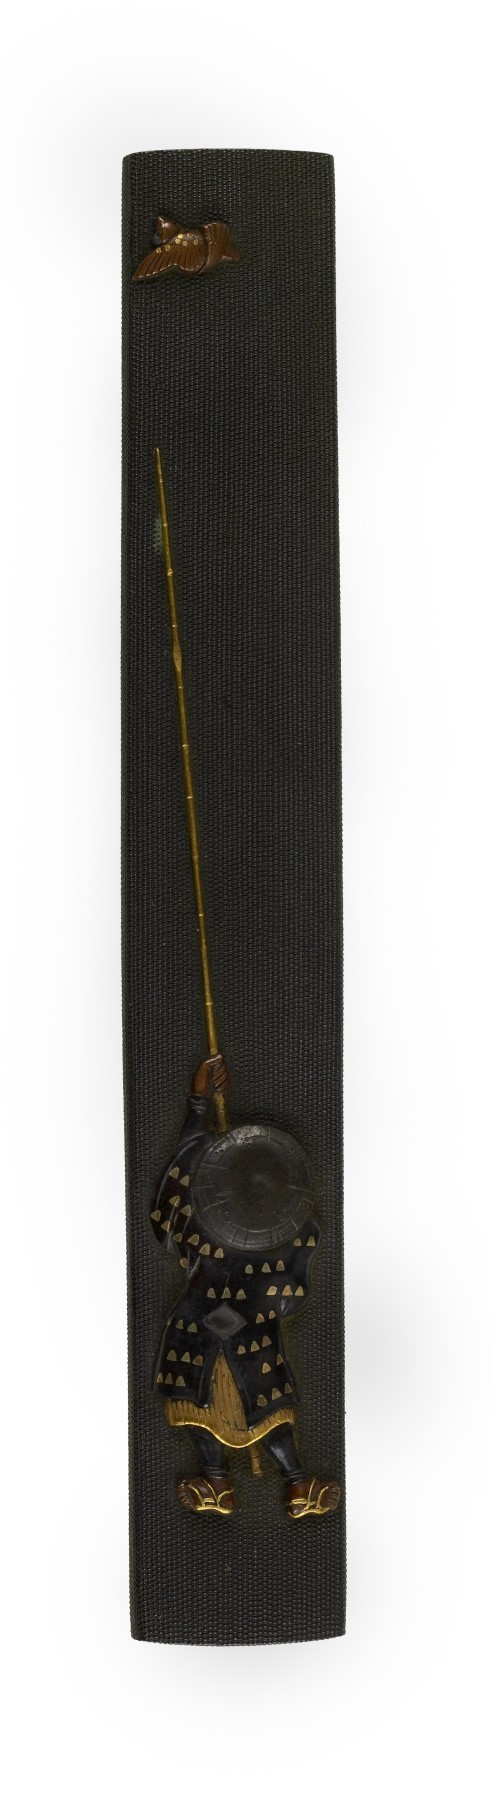 Kozuka with a Man and a Blowpipe